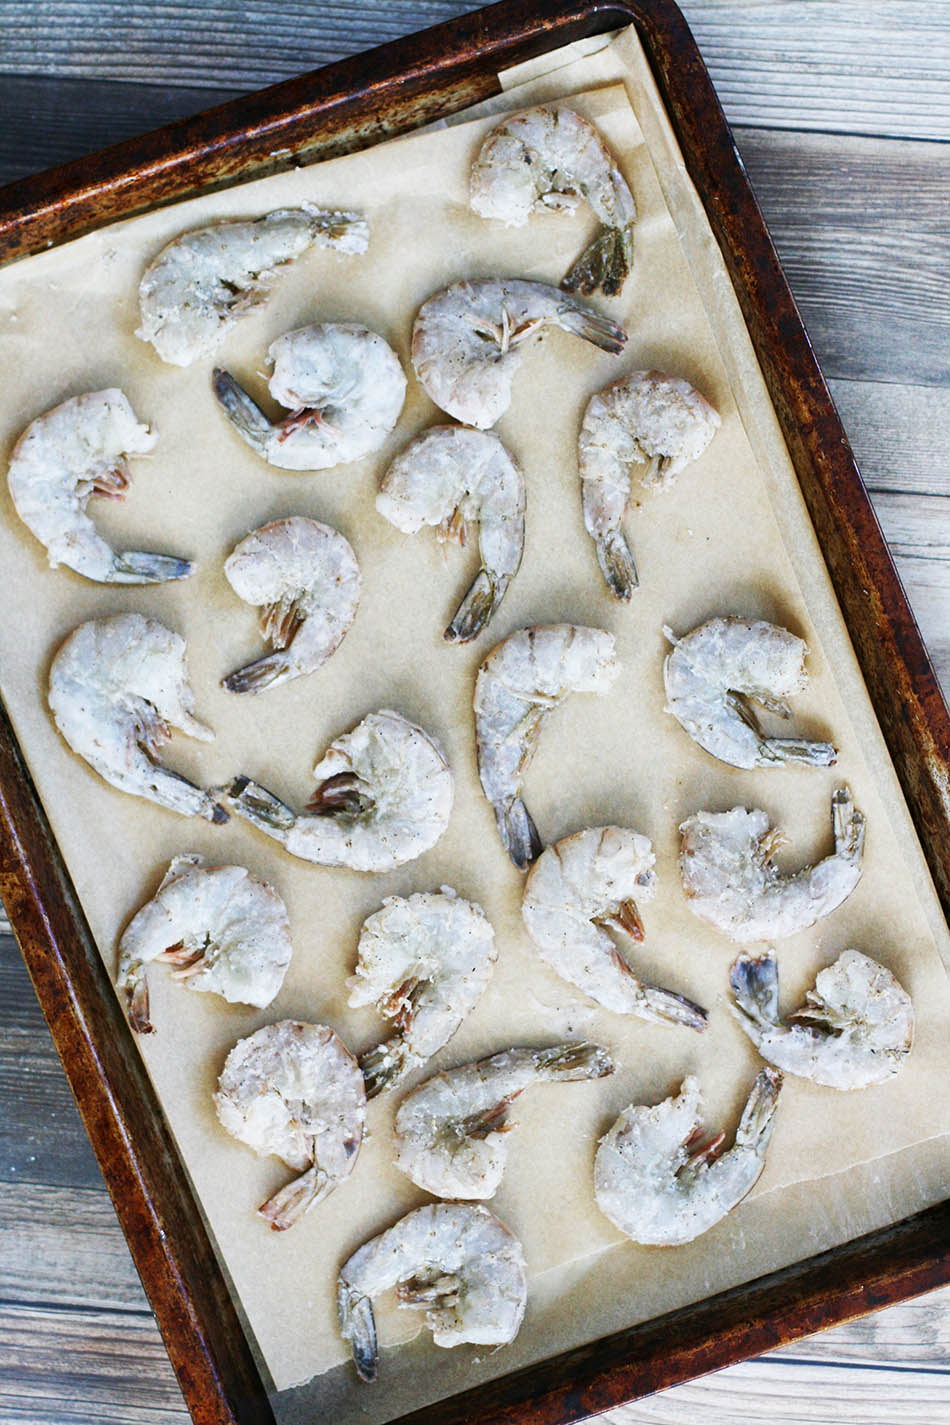 The easiest way to make shrimp at home: Click through for instructions!